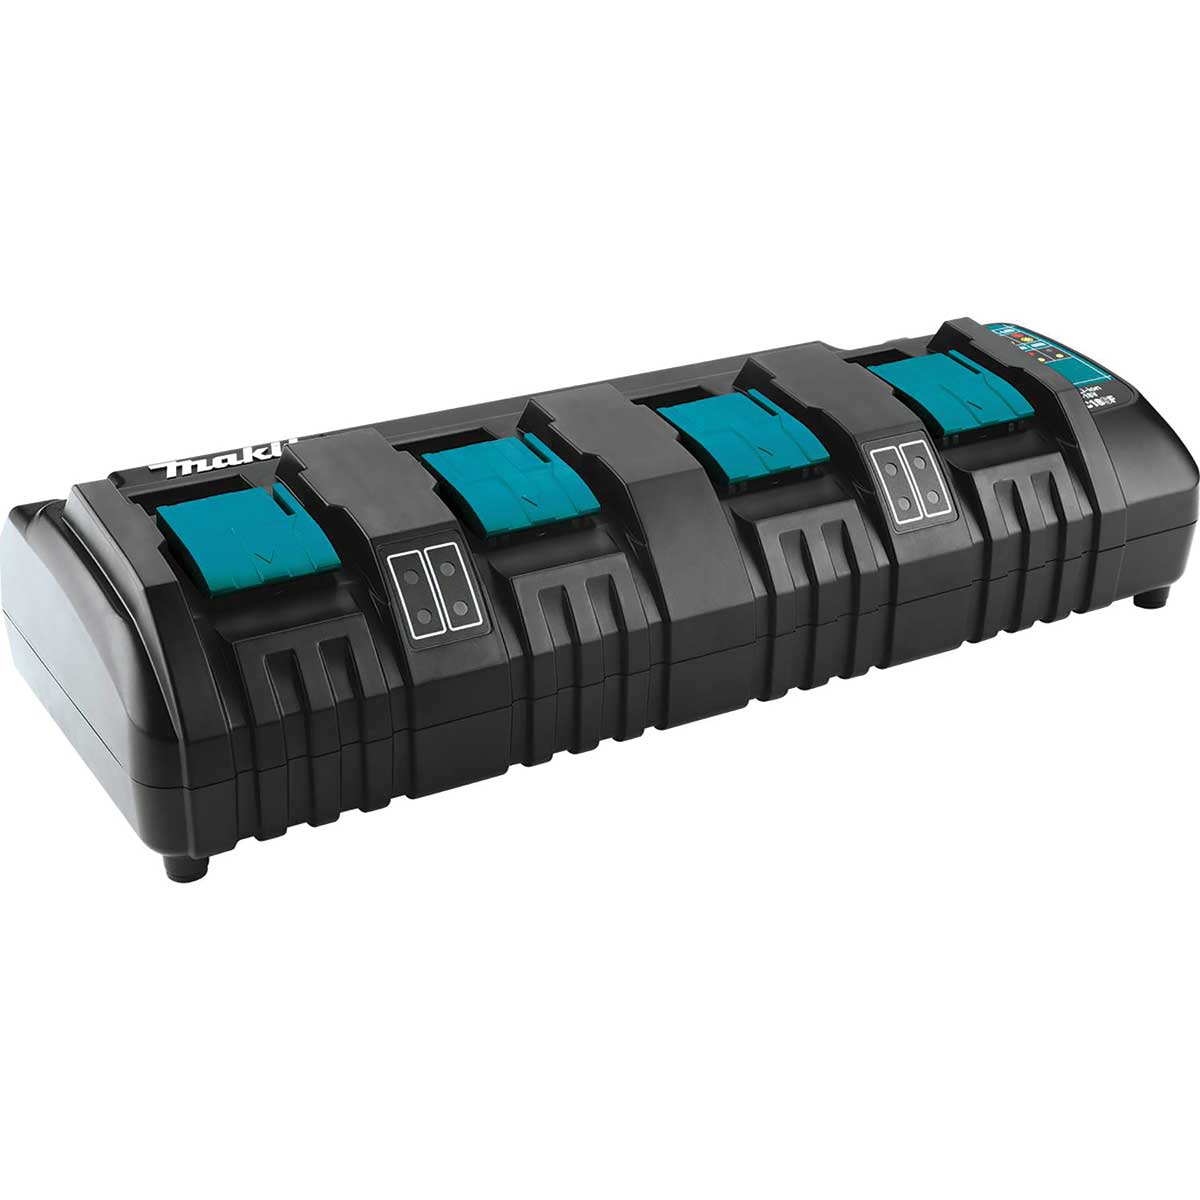 Makita DC18SF 18V LXT® Lithium-Ion 4-Port Charger